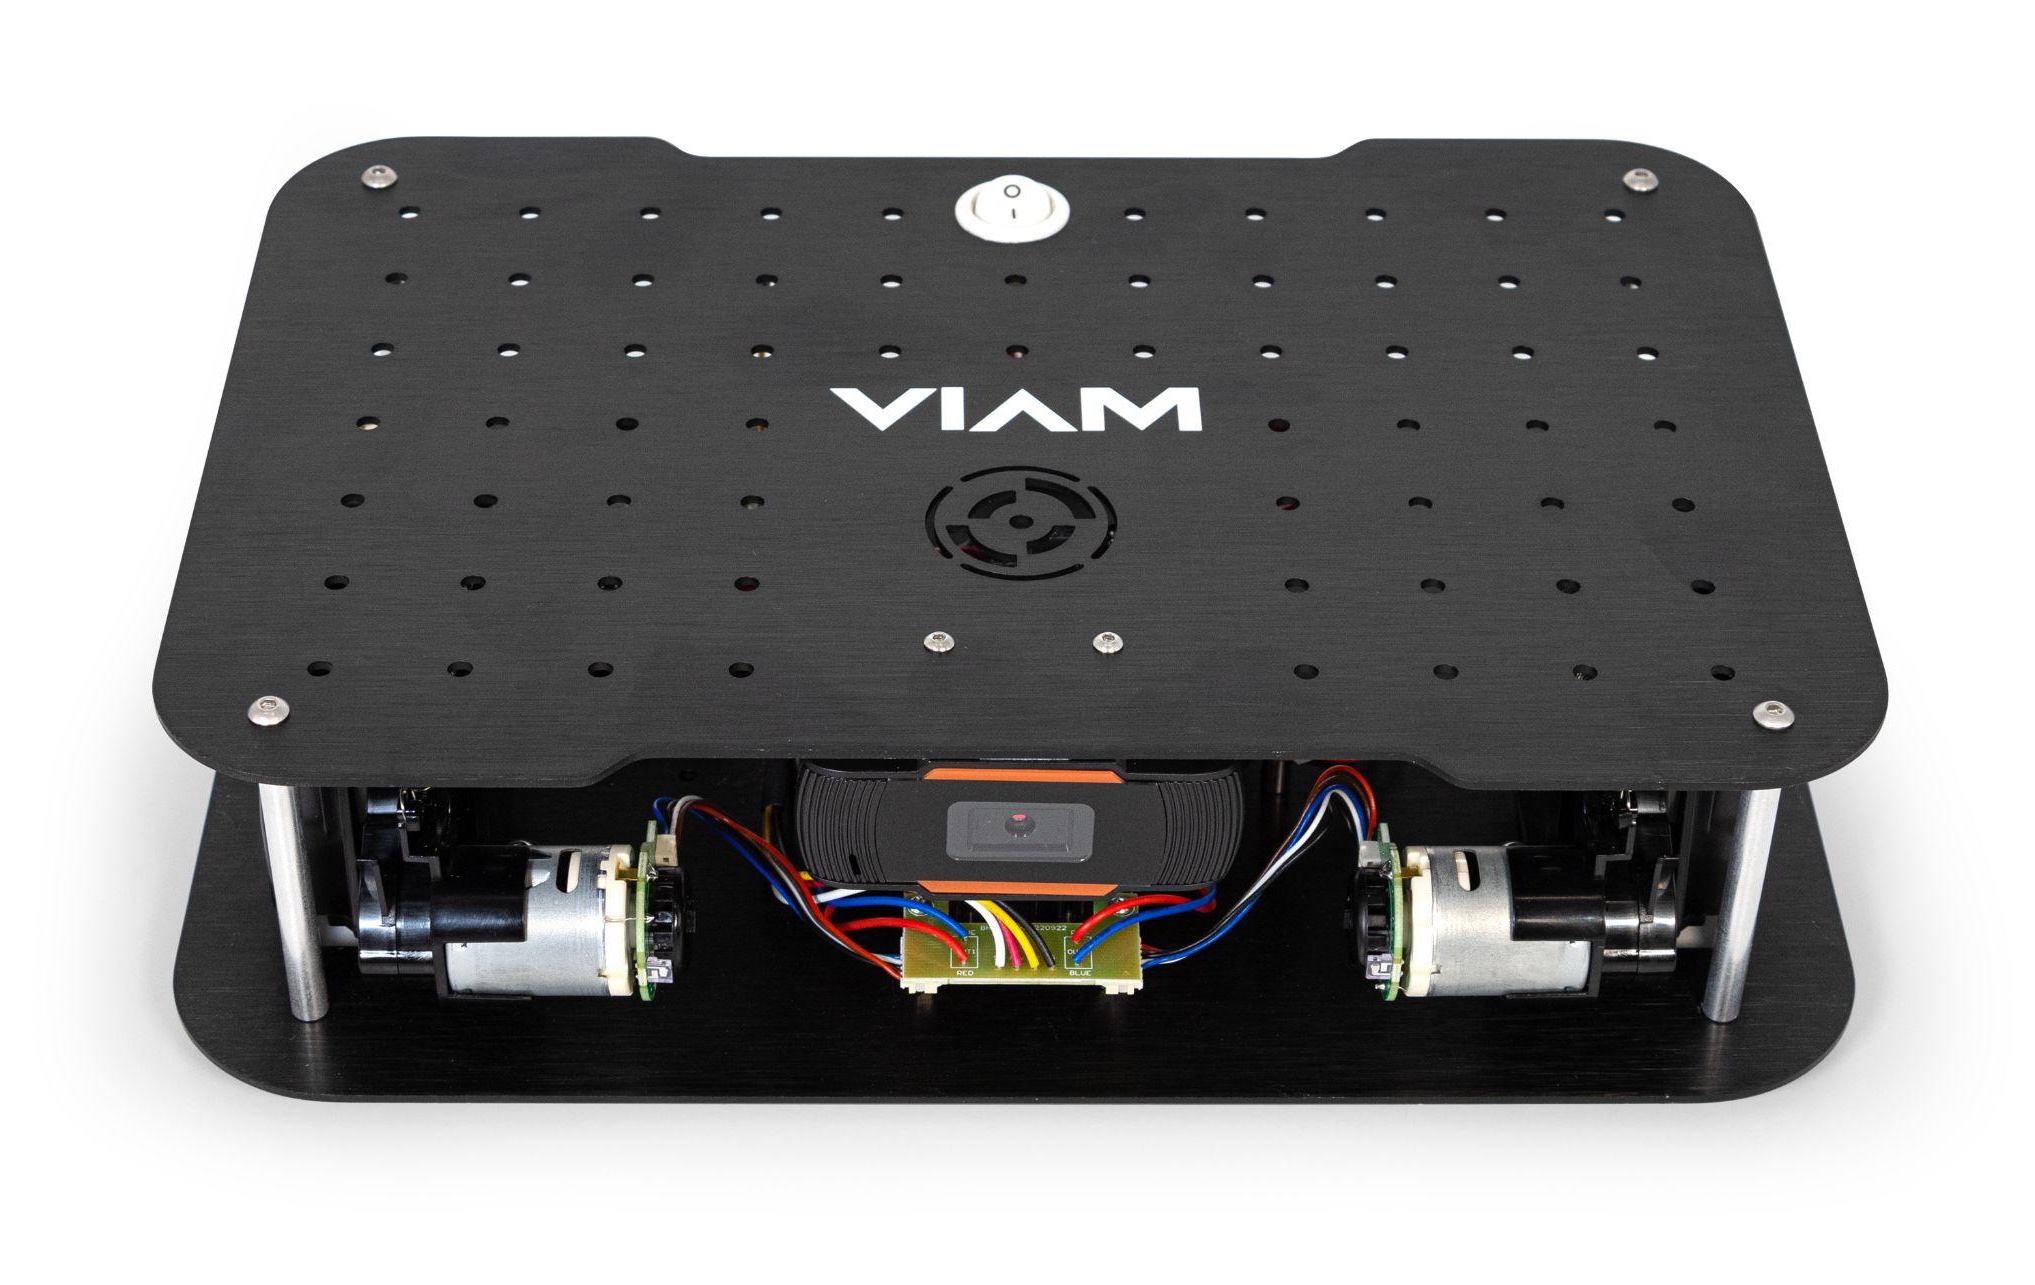 The front of the assembled Viam Rover 1